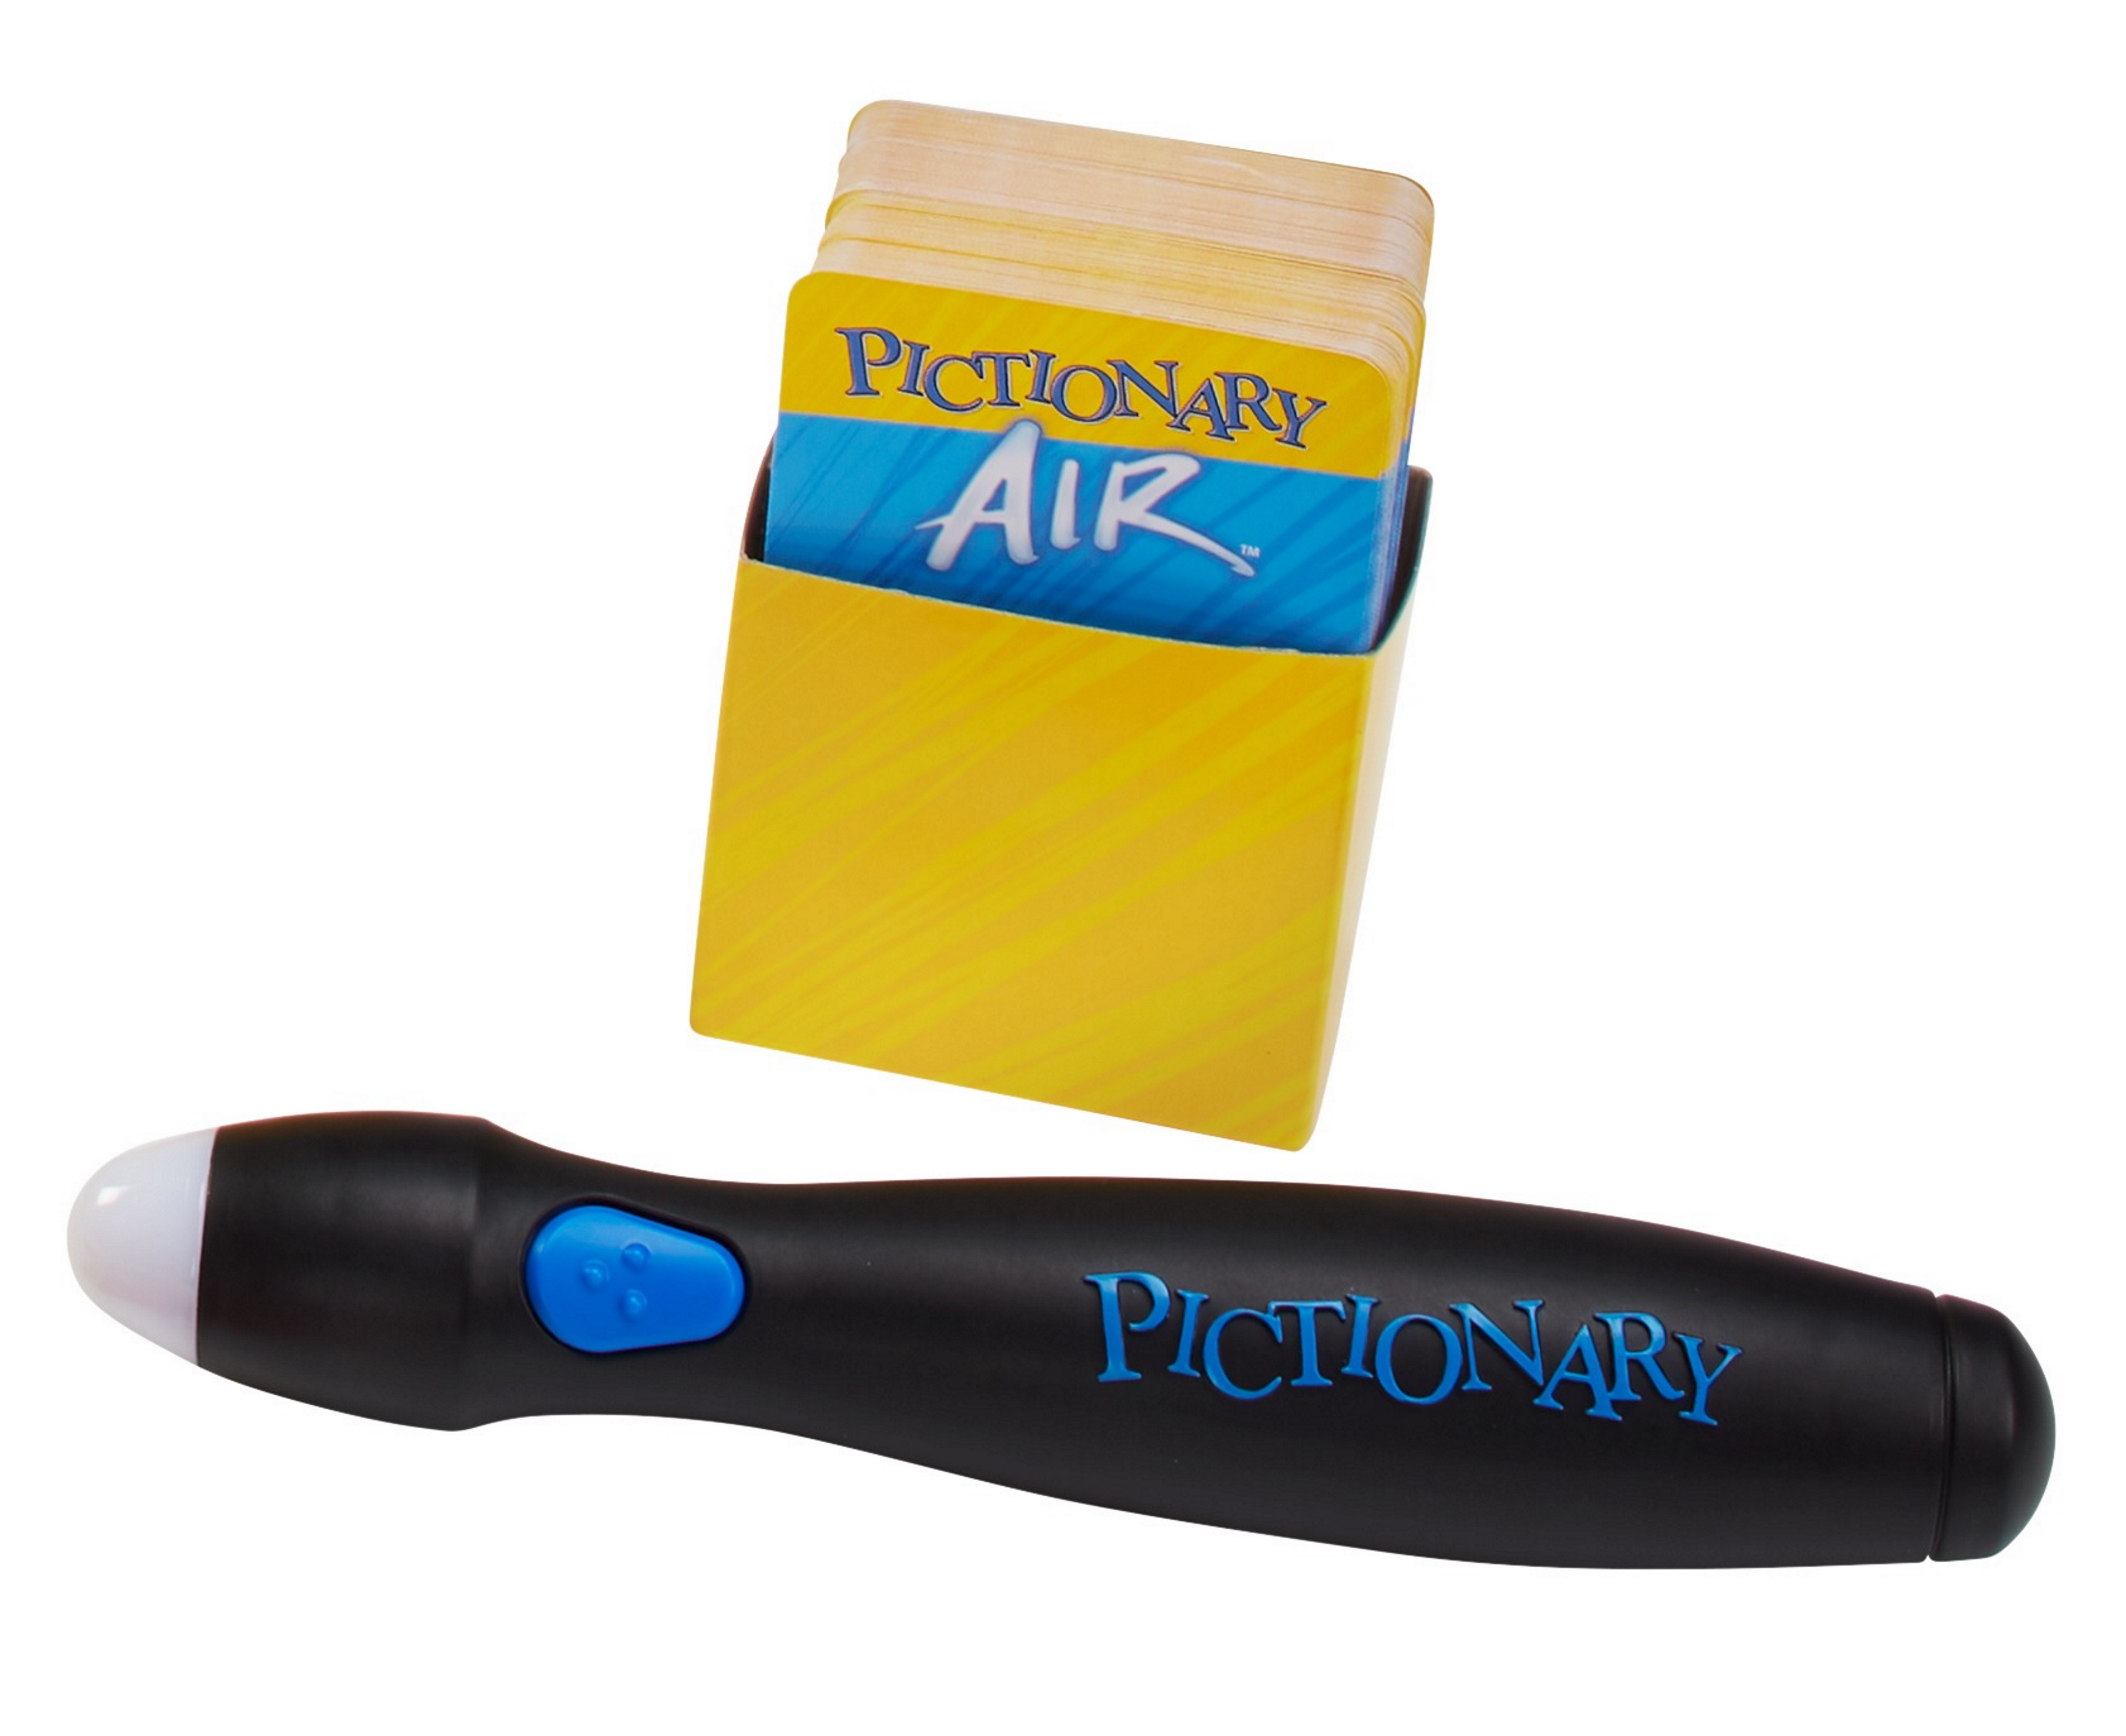 Pictionary Air Portuguese_PVP 27,99€ (2)